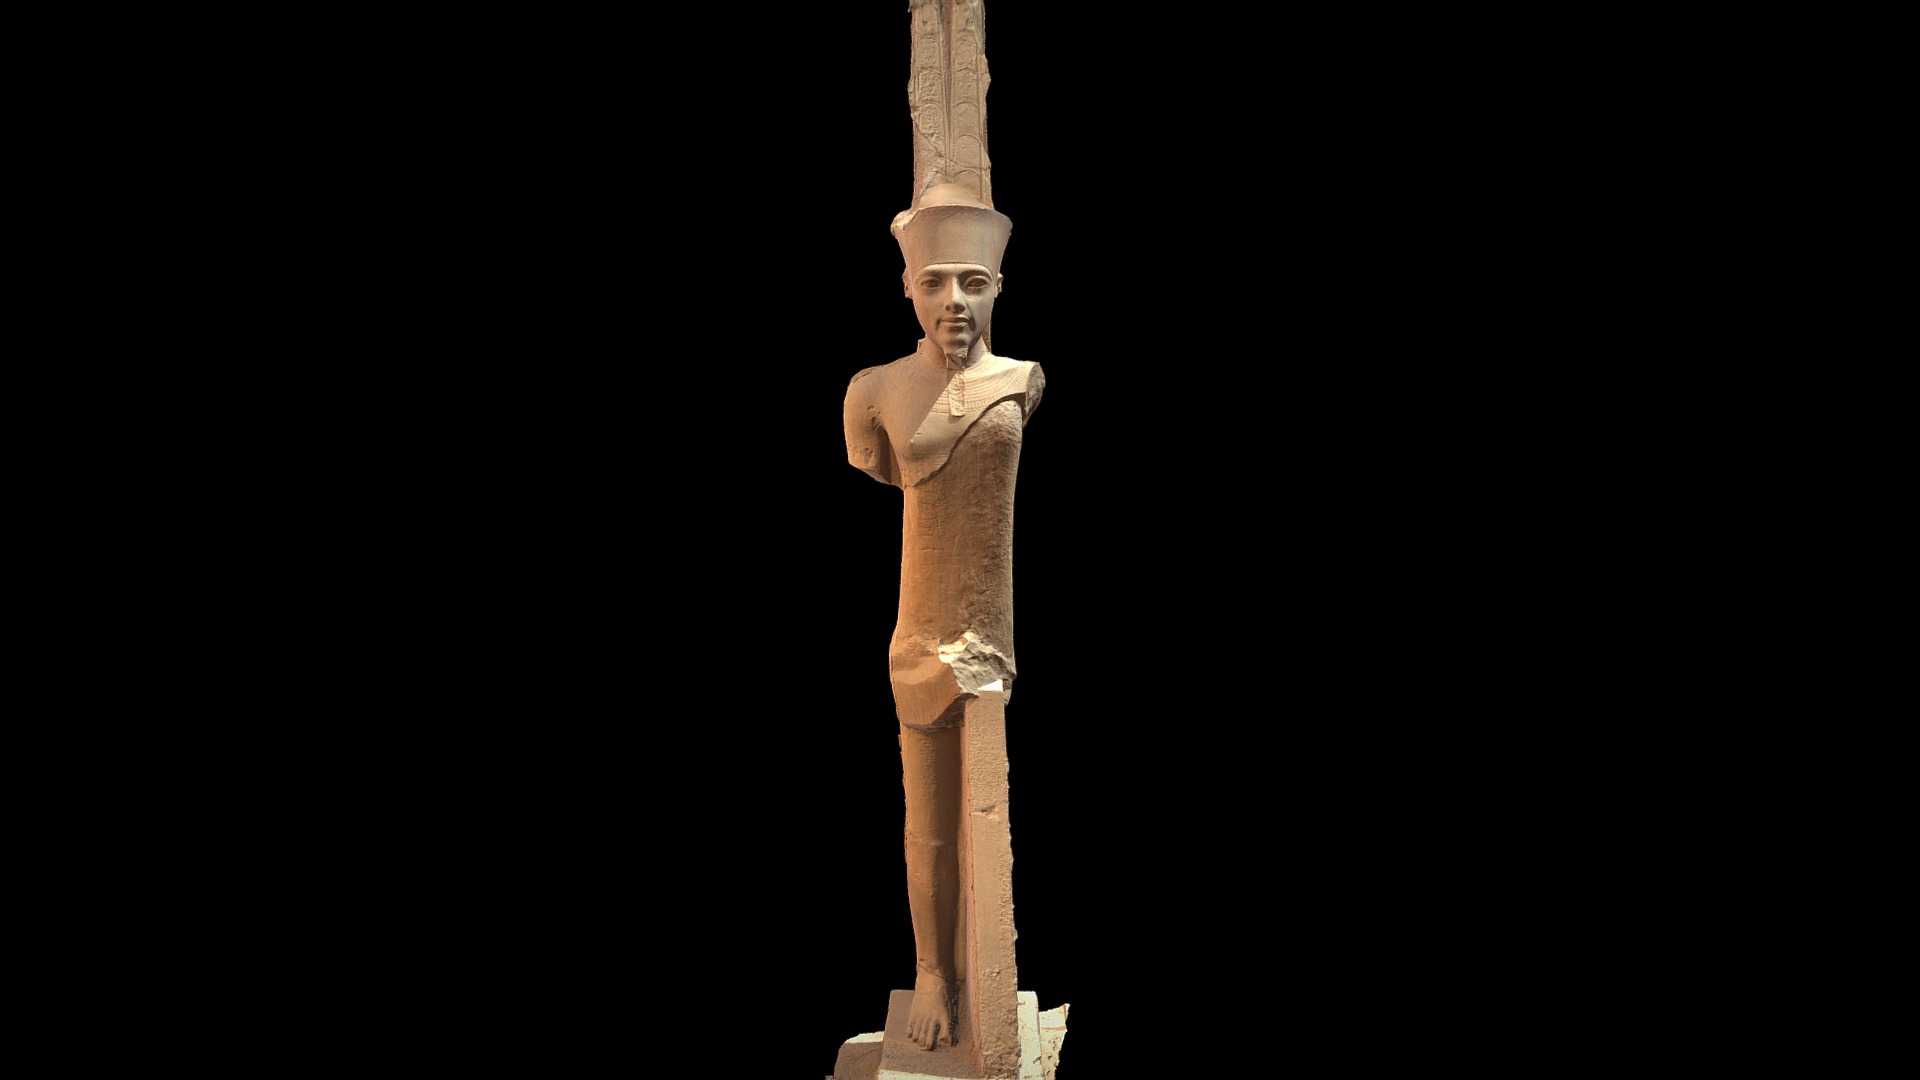 3D model Amon – Karnac - This is a 3D model of the Amon - Karnac. The 3D model is about a statue of a person holding a sword.